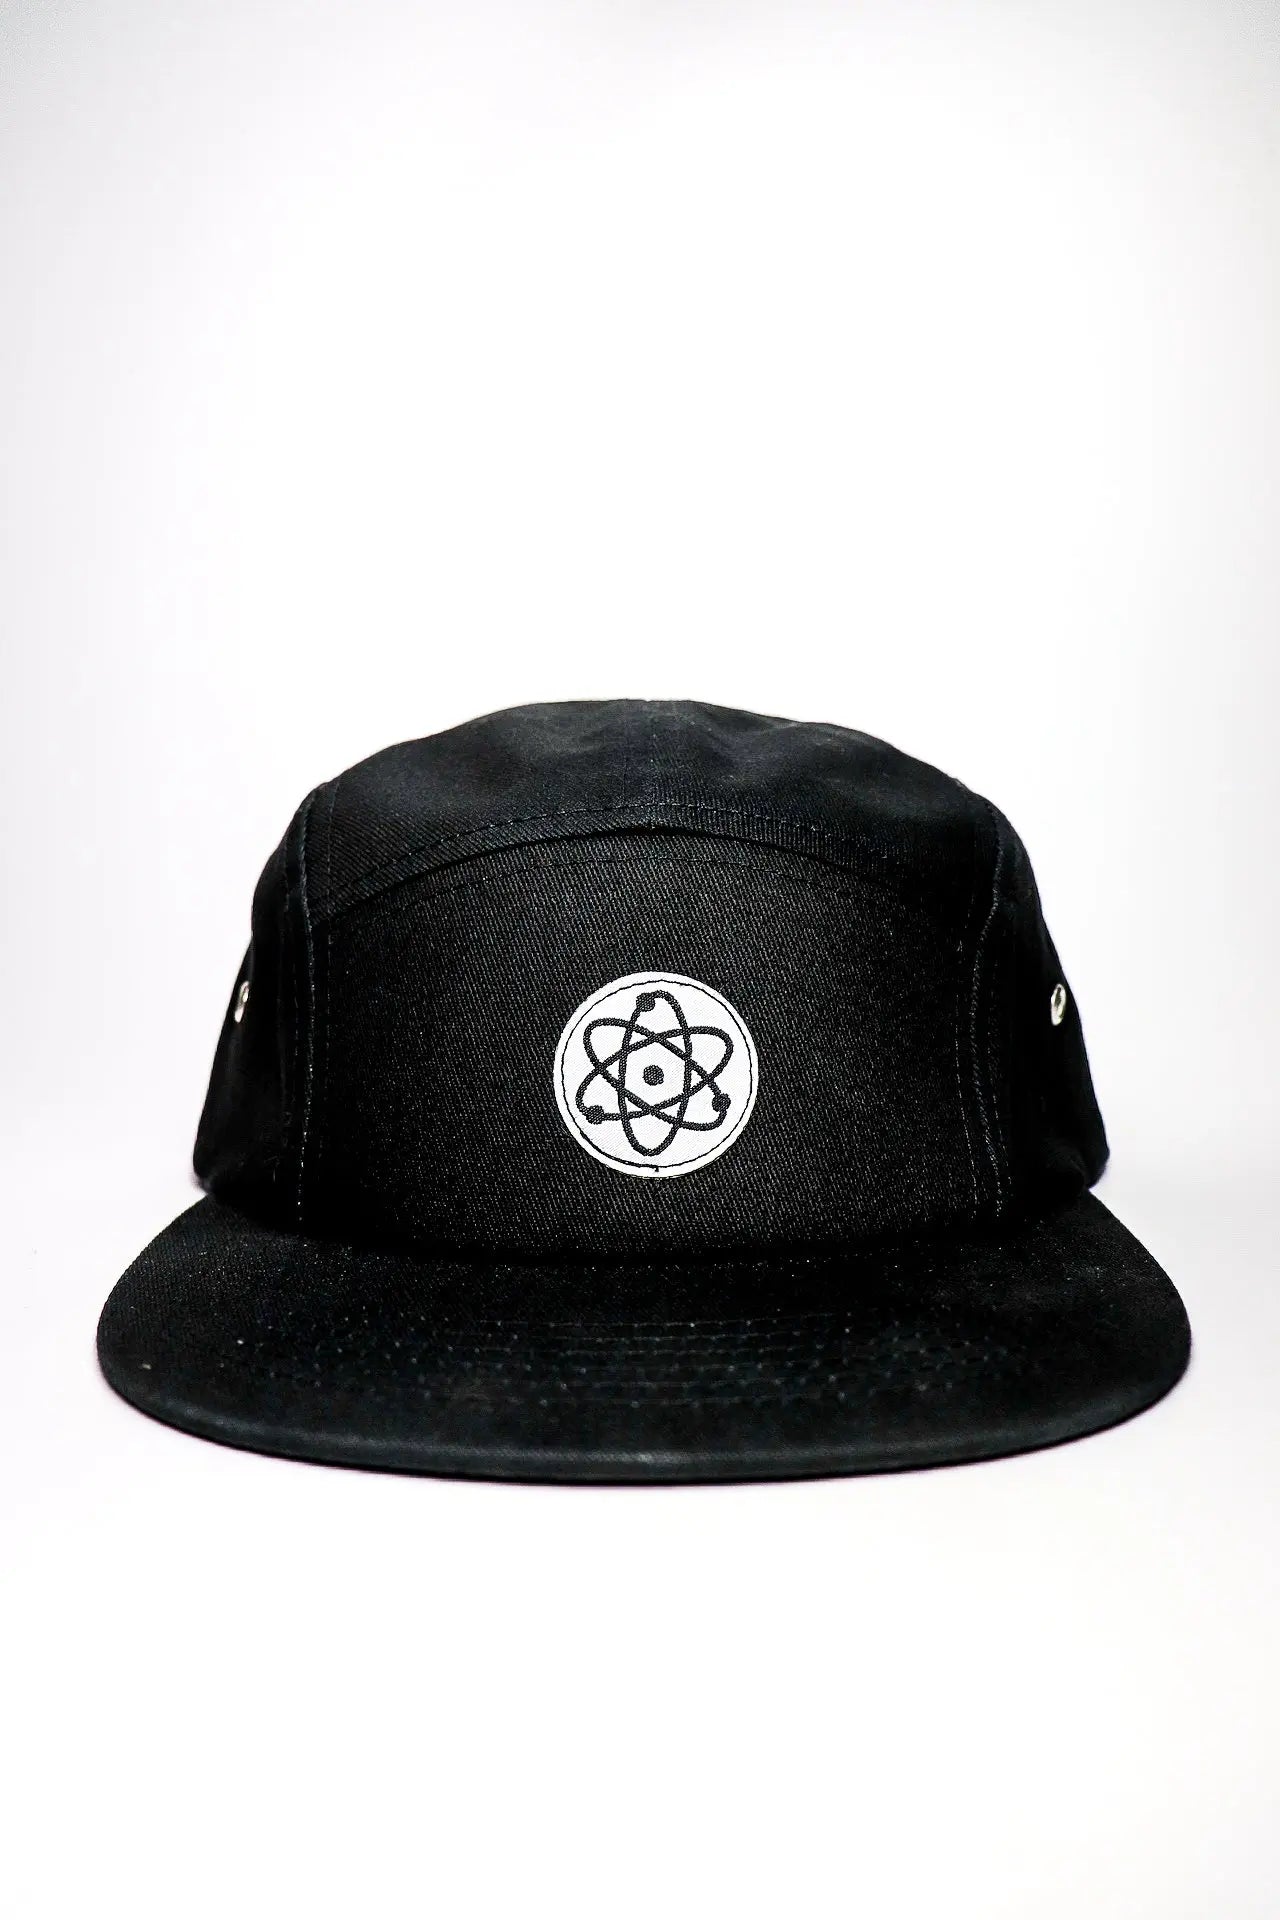 STEMcell Atom Cap - THE STEMCELL SCIENCE SHOP